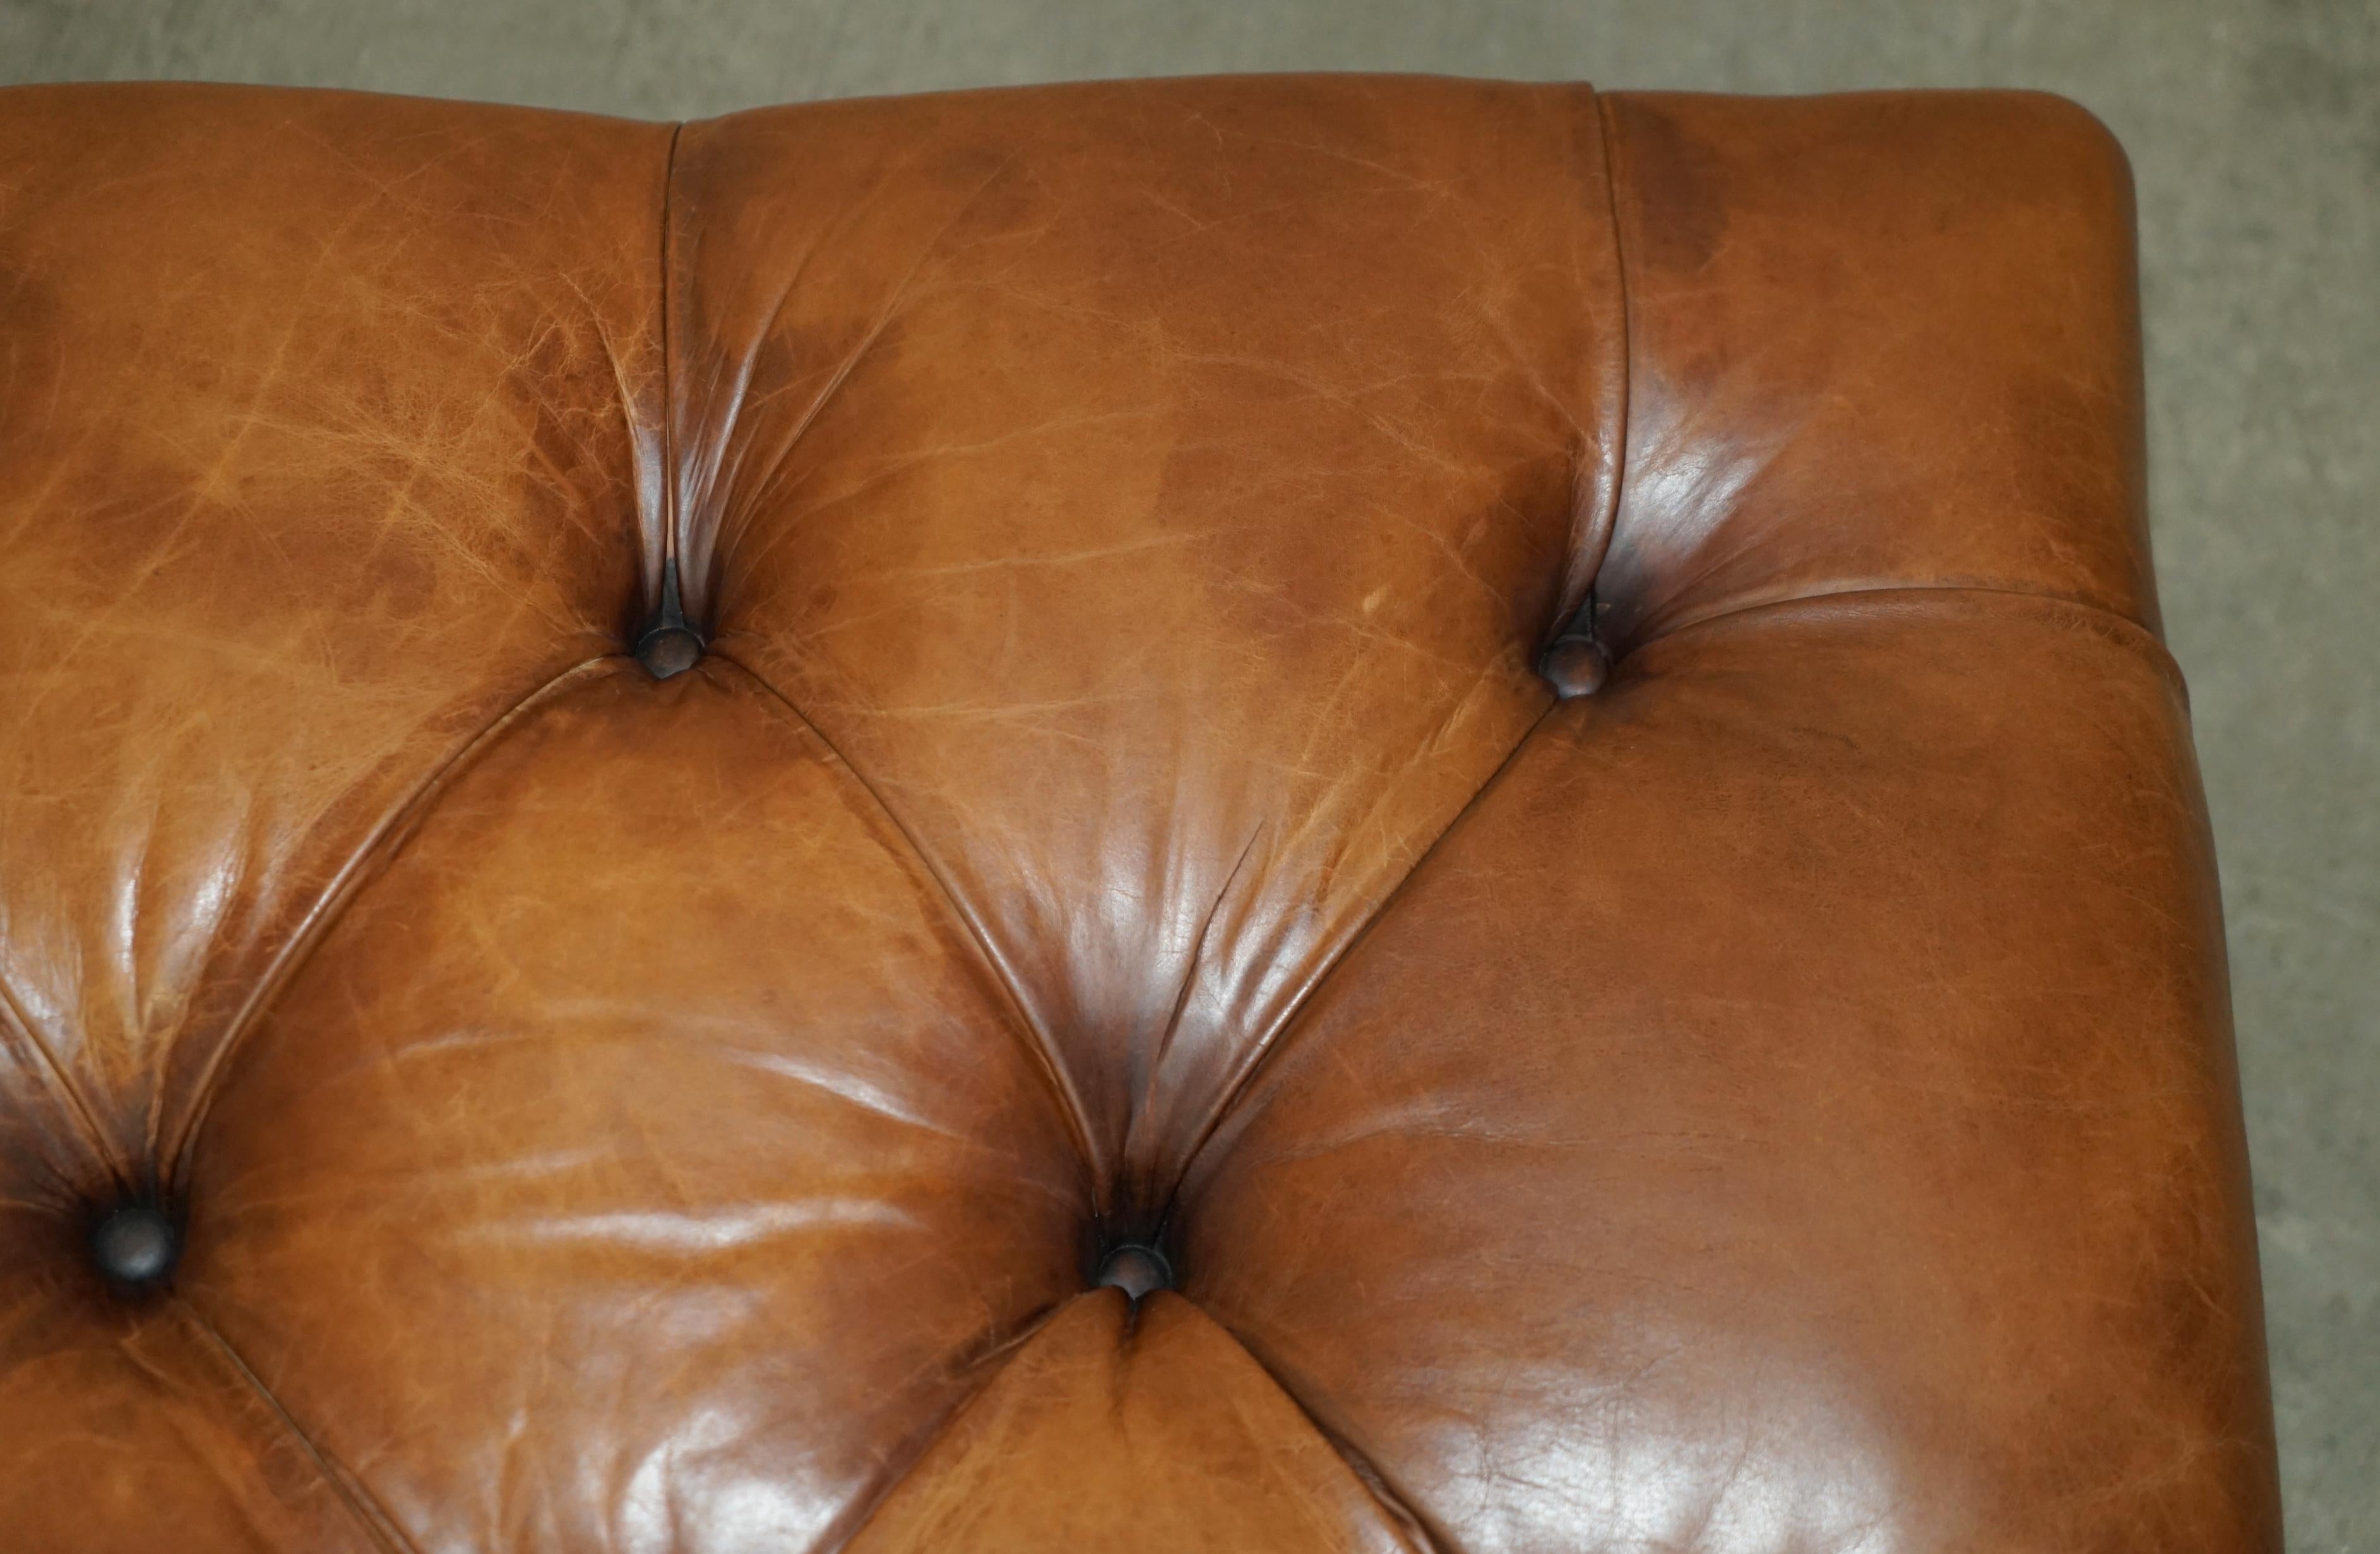 RALPH LAUREN WRITER'S CHESTERFIELD FOOTSTOOL OTTOMAN IN HERiTAGE BROWN LEATHER 5